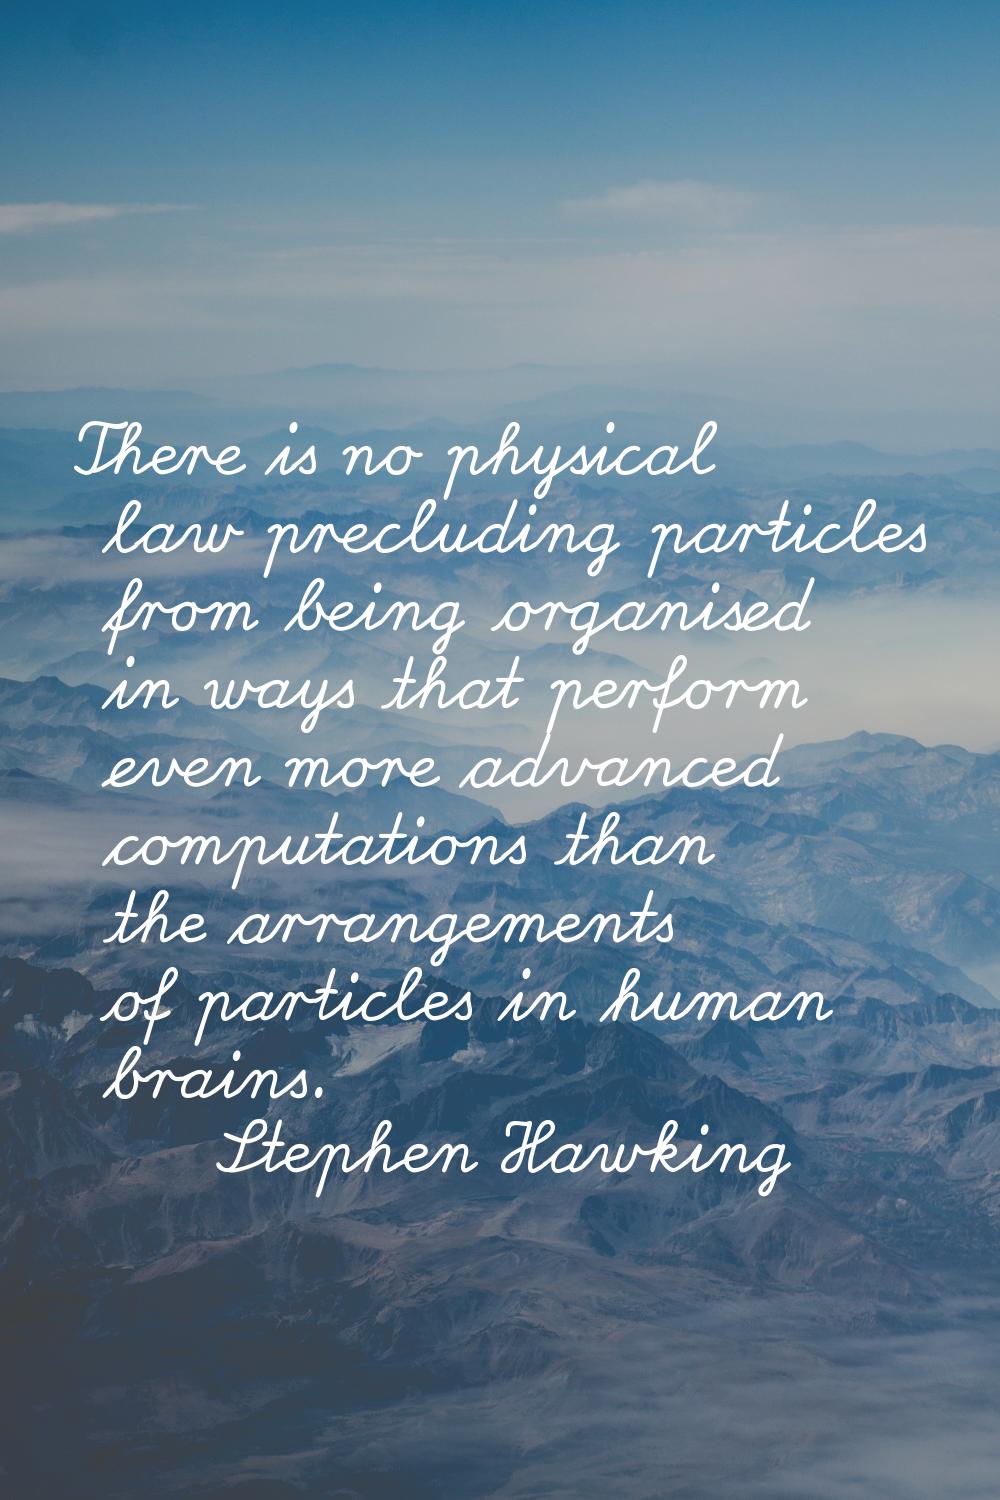 There is no physical law precluding particles from being organised in ways that perform even more a